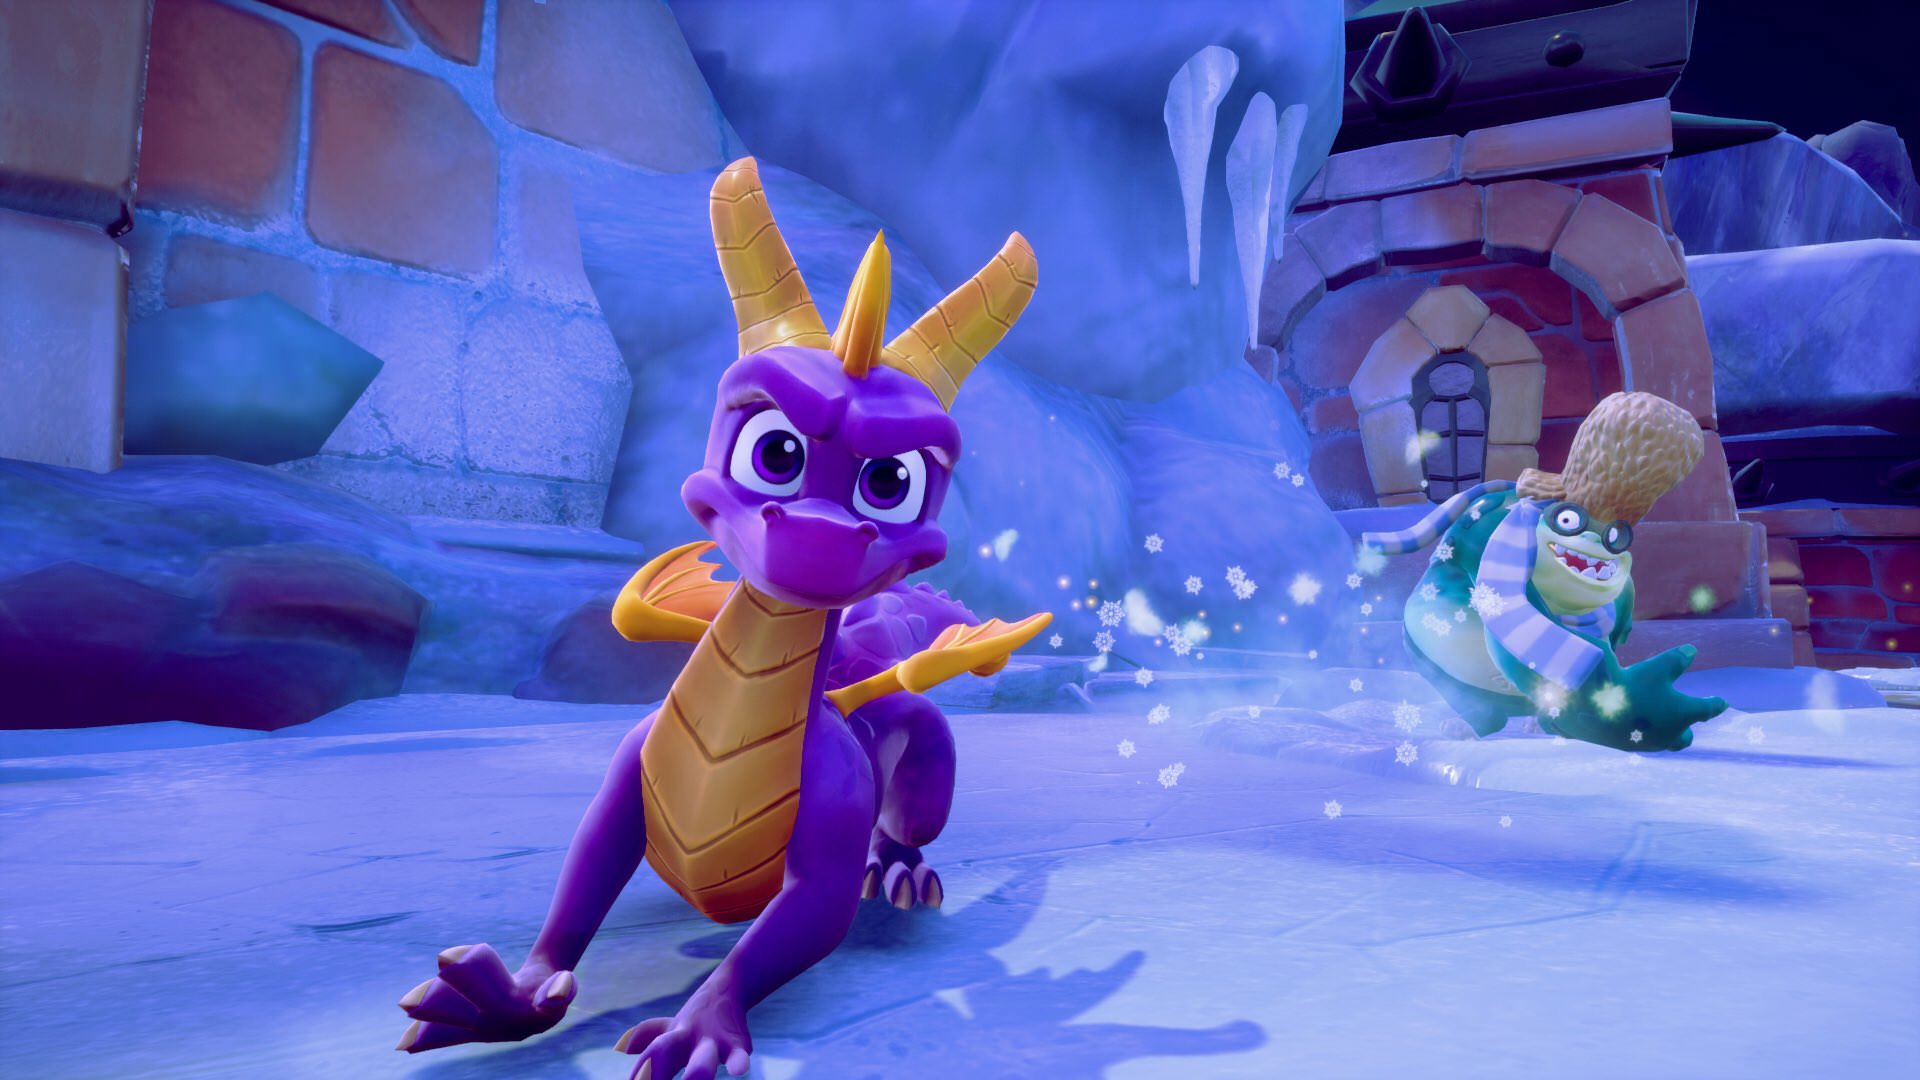 Spyro Running From Snowball Gnorc - Spyro Reignited Trilogy Ice Cavern , HD Wallpaper & Backgrounds